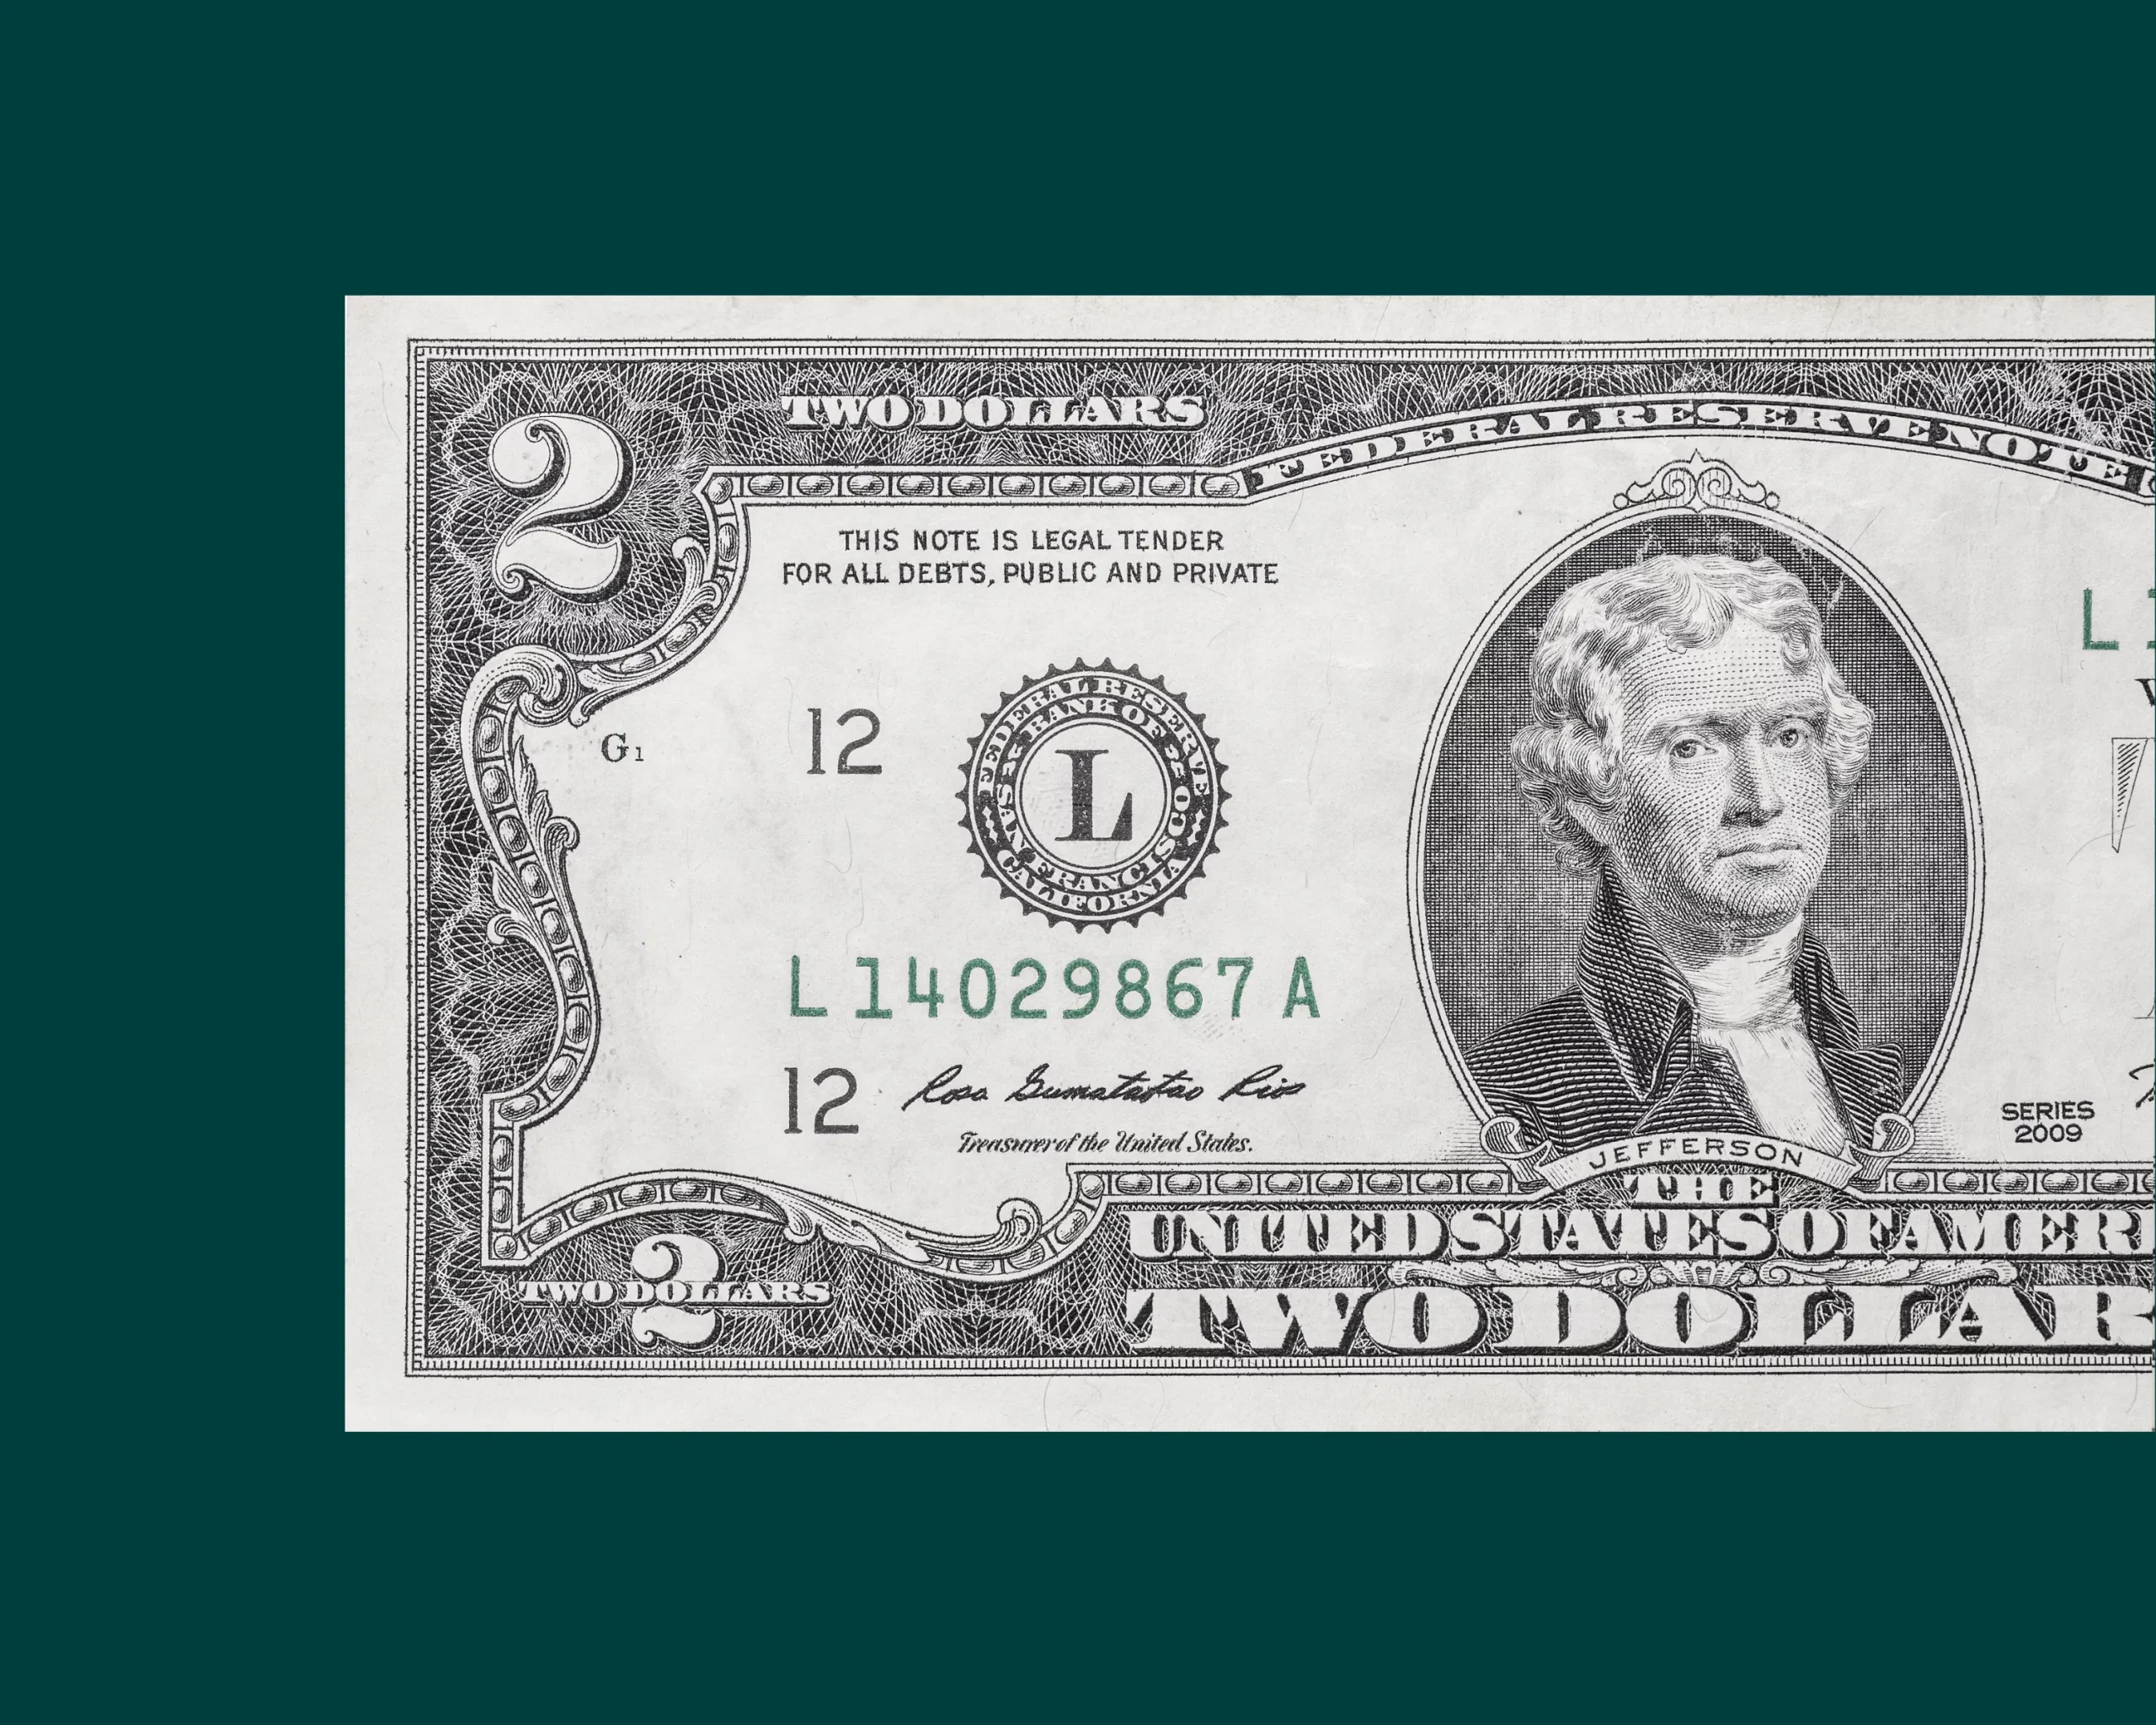 The US $1,000 Dollar Bill: History, Features, and Significance